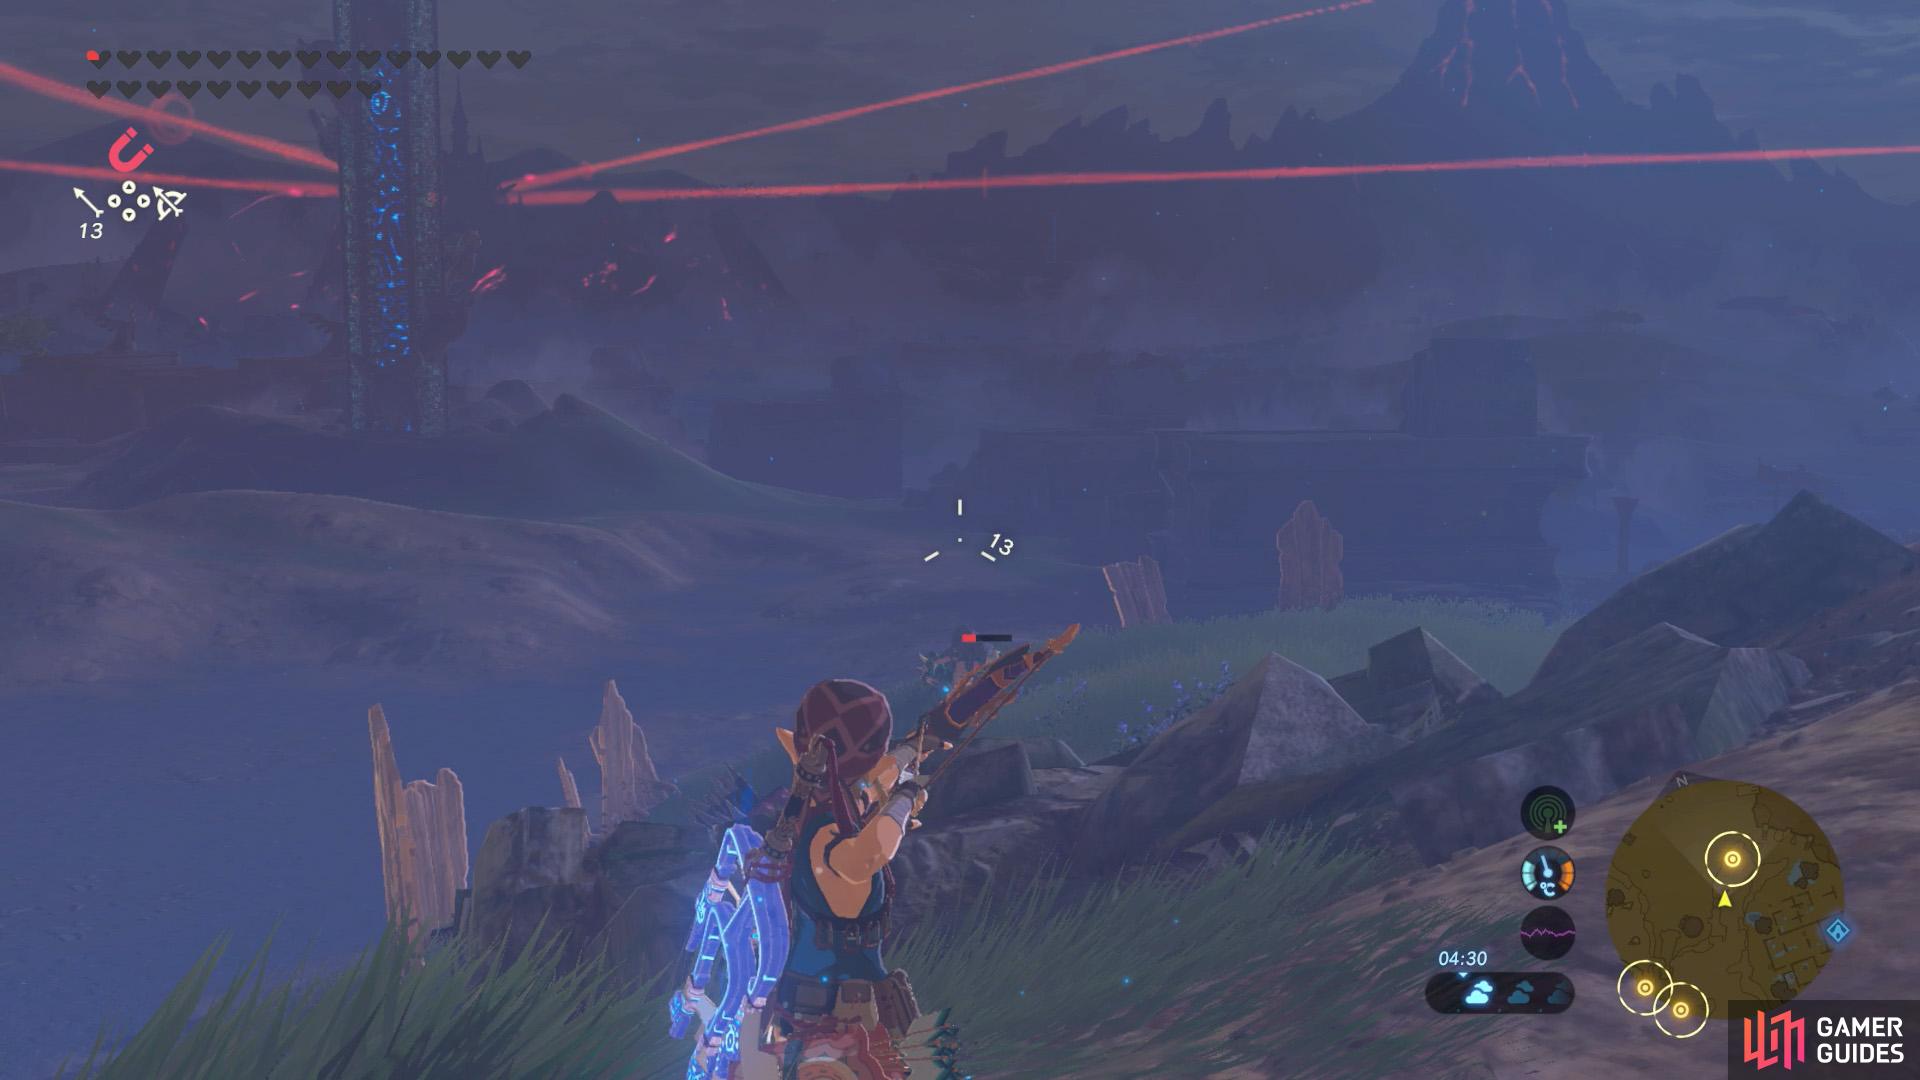 Snipe this final patrolling Lizalfos towards the left.